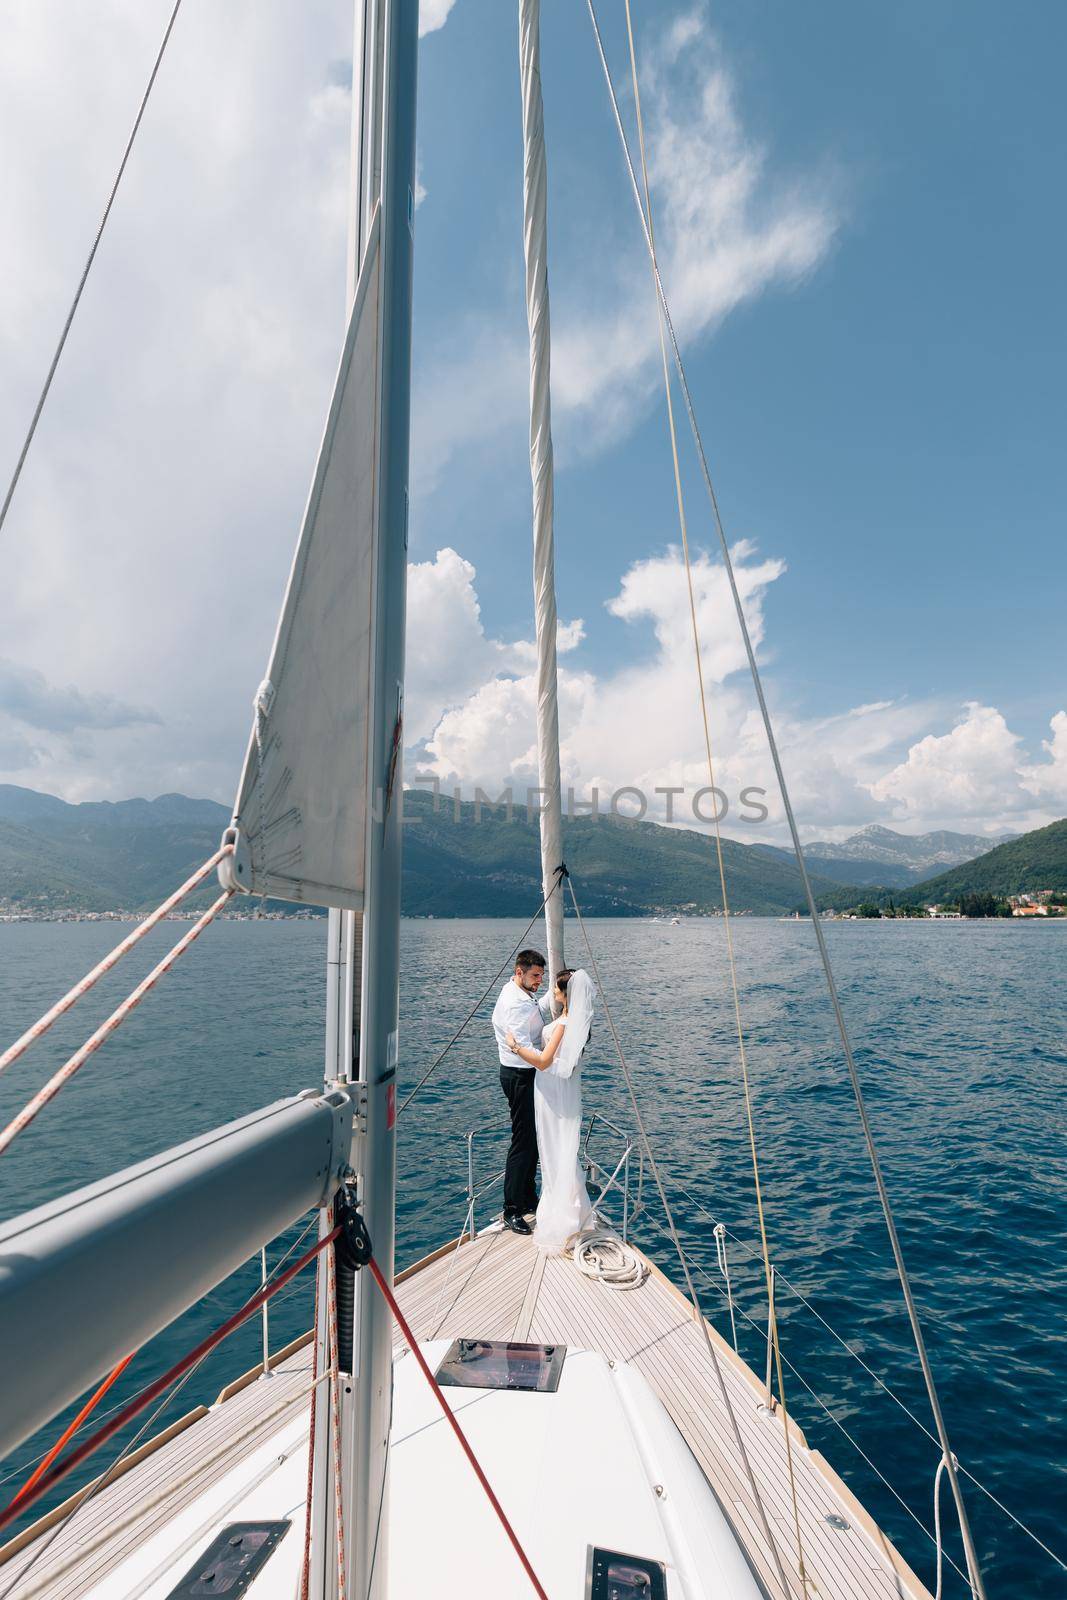 The bride and groom are hugging while standing on the bow of a white yacht sailing in the Bay of Kotor by Nadtochiy